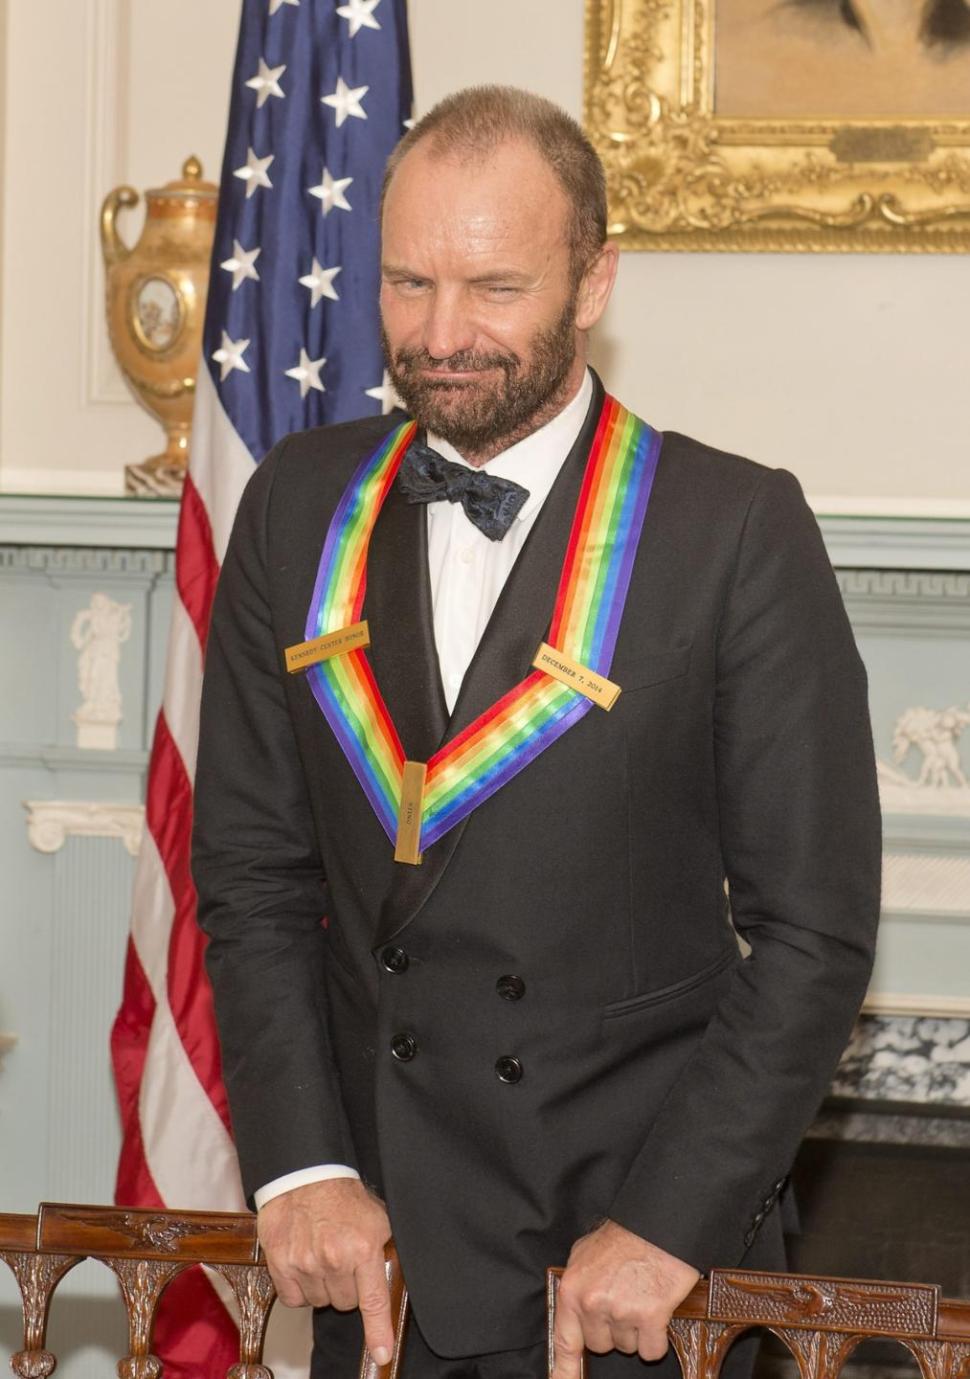 Sting said he was bewildered to receive the honor.